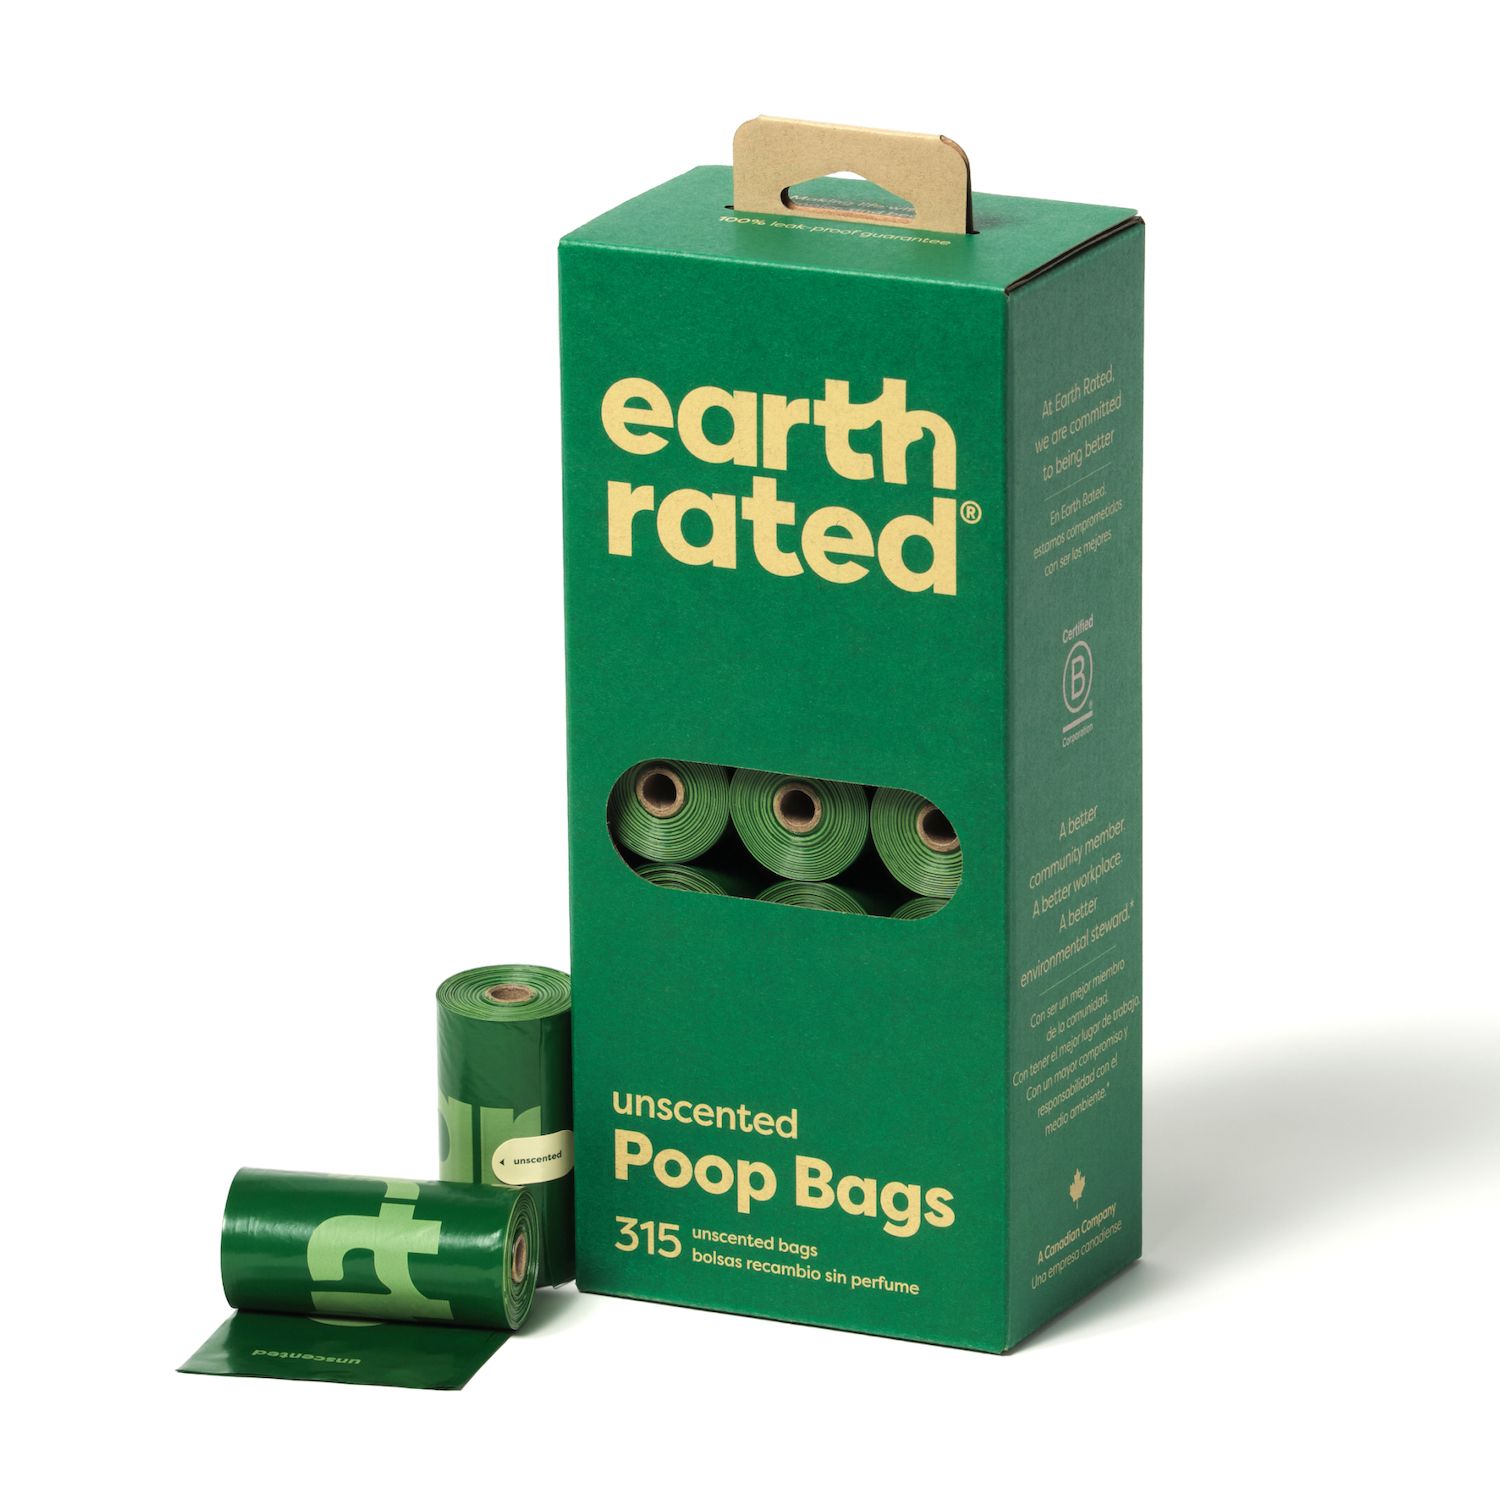 Image for Earth Rated 315 Bags on 21 Refill Rolls - Unscented at Kohl's.